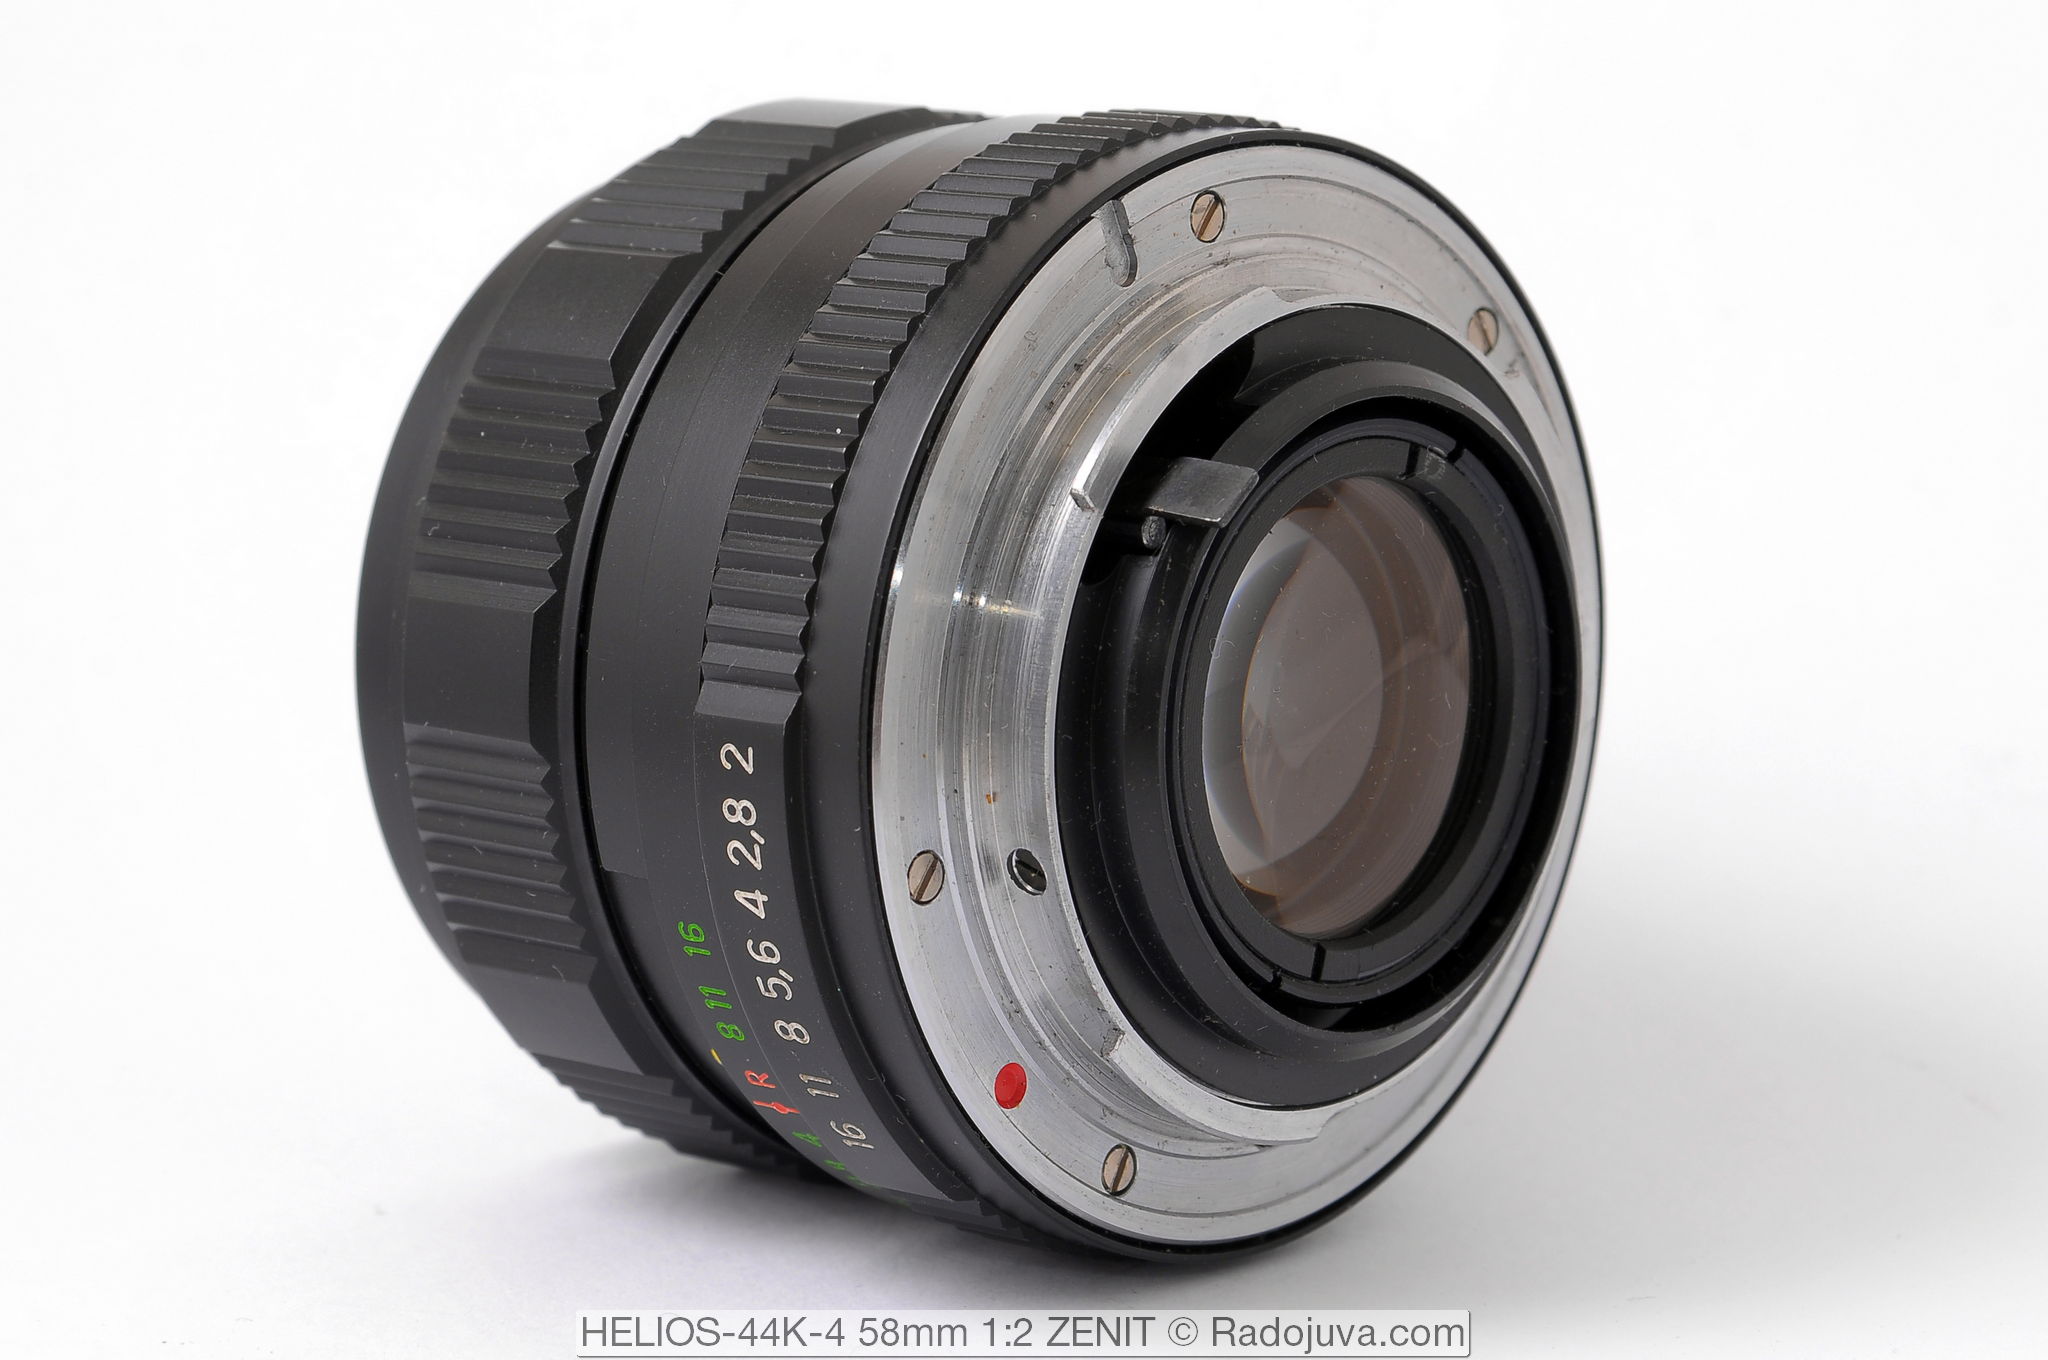 HELIOS-44K-4 58mm 1: 2 with Pentax mount